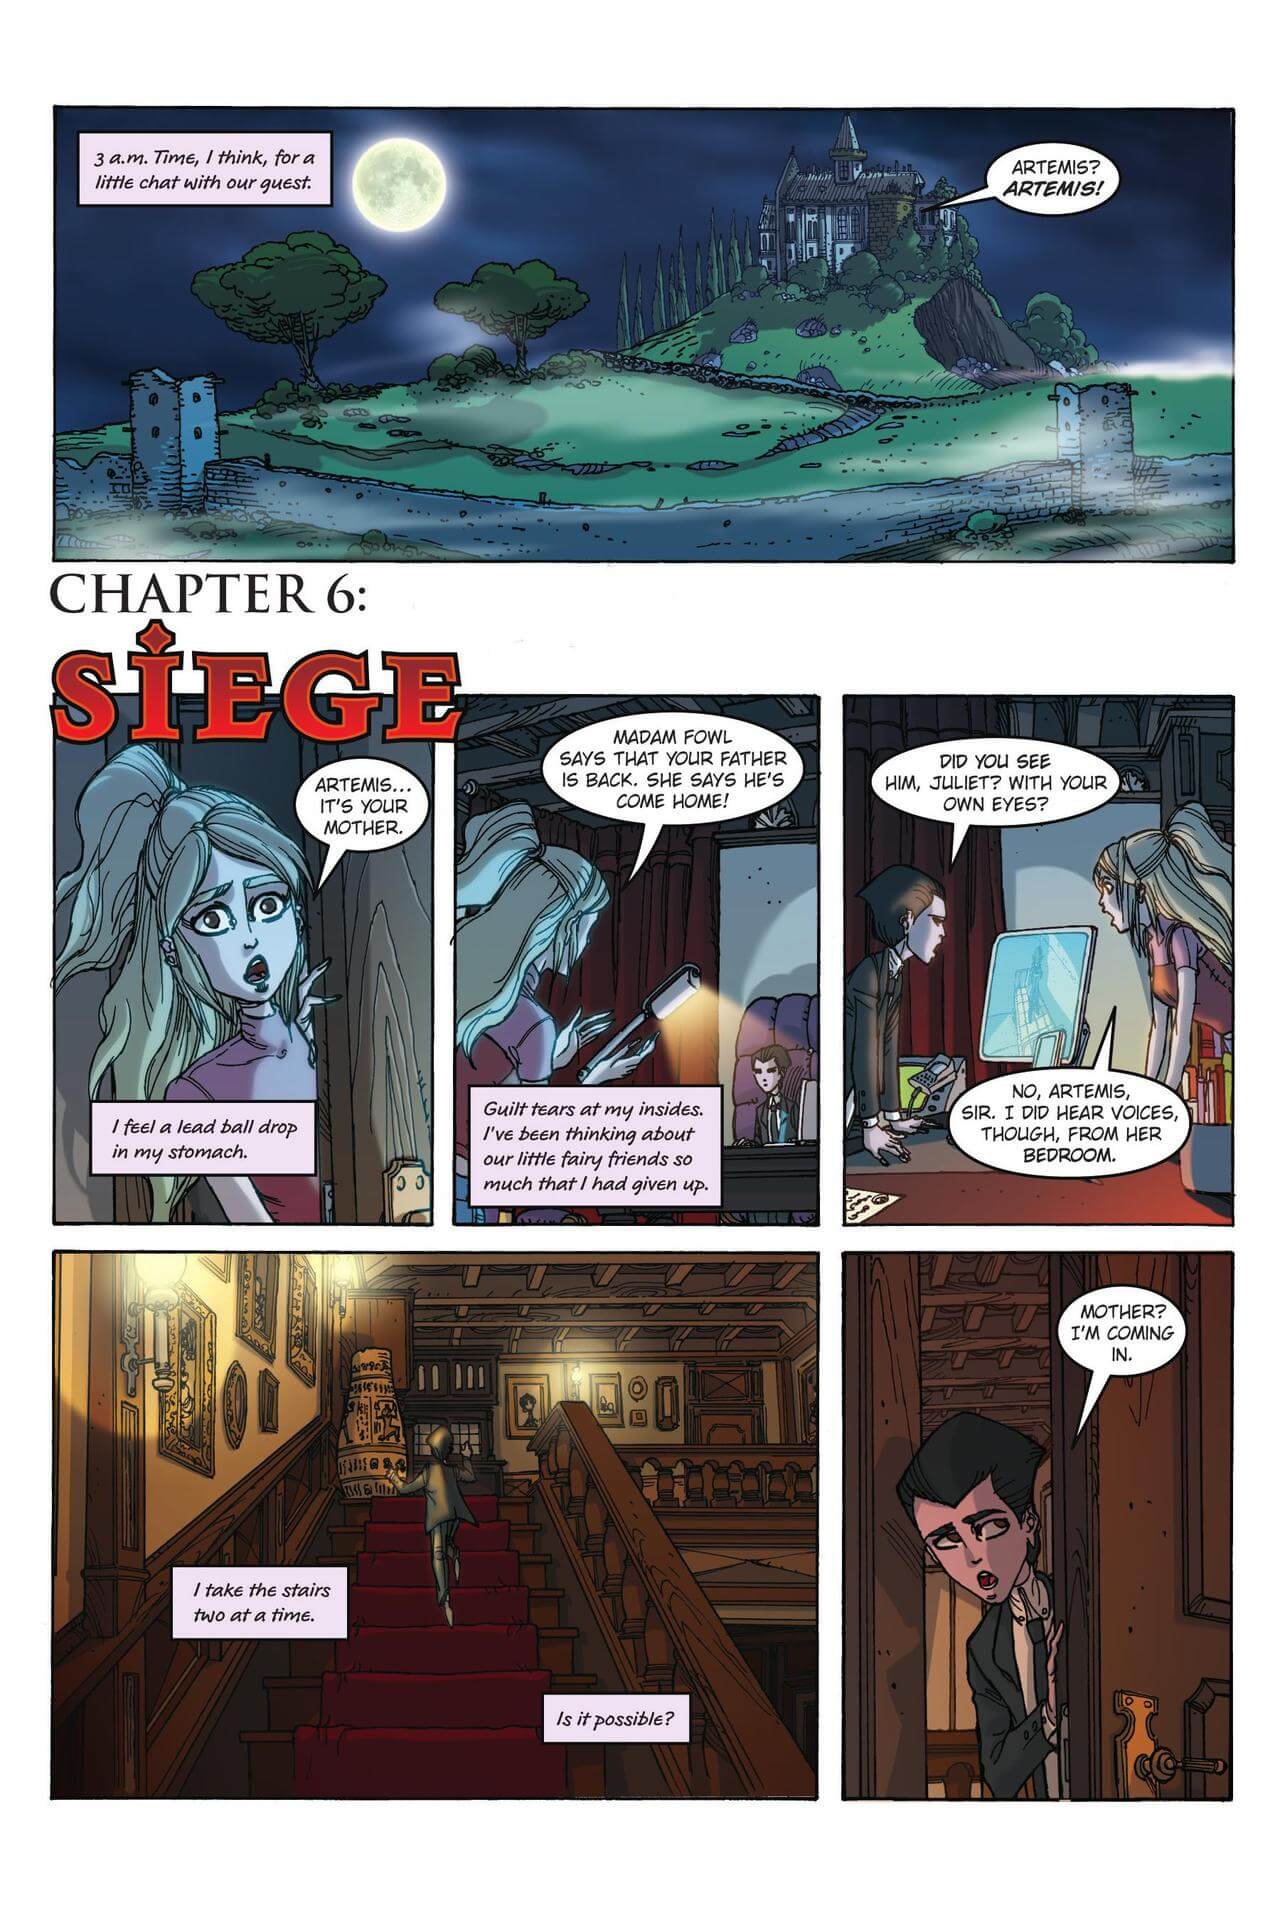 page 46 of artemis fowl the graphic novel